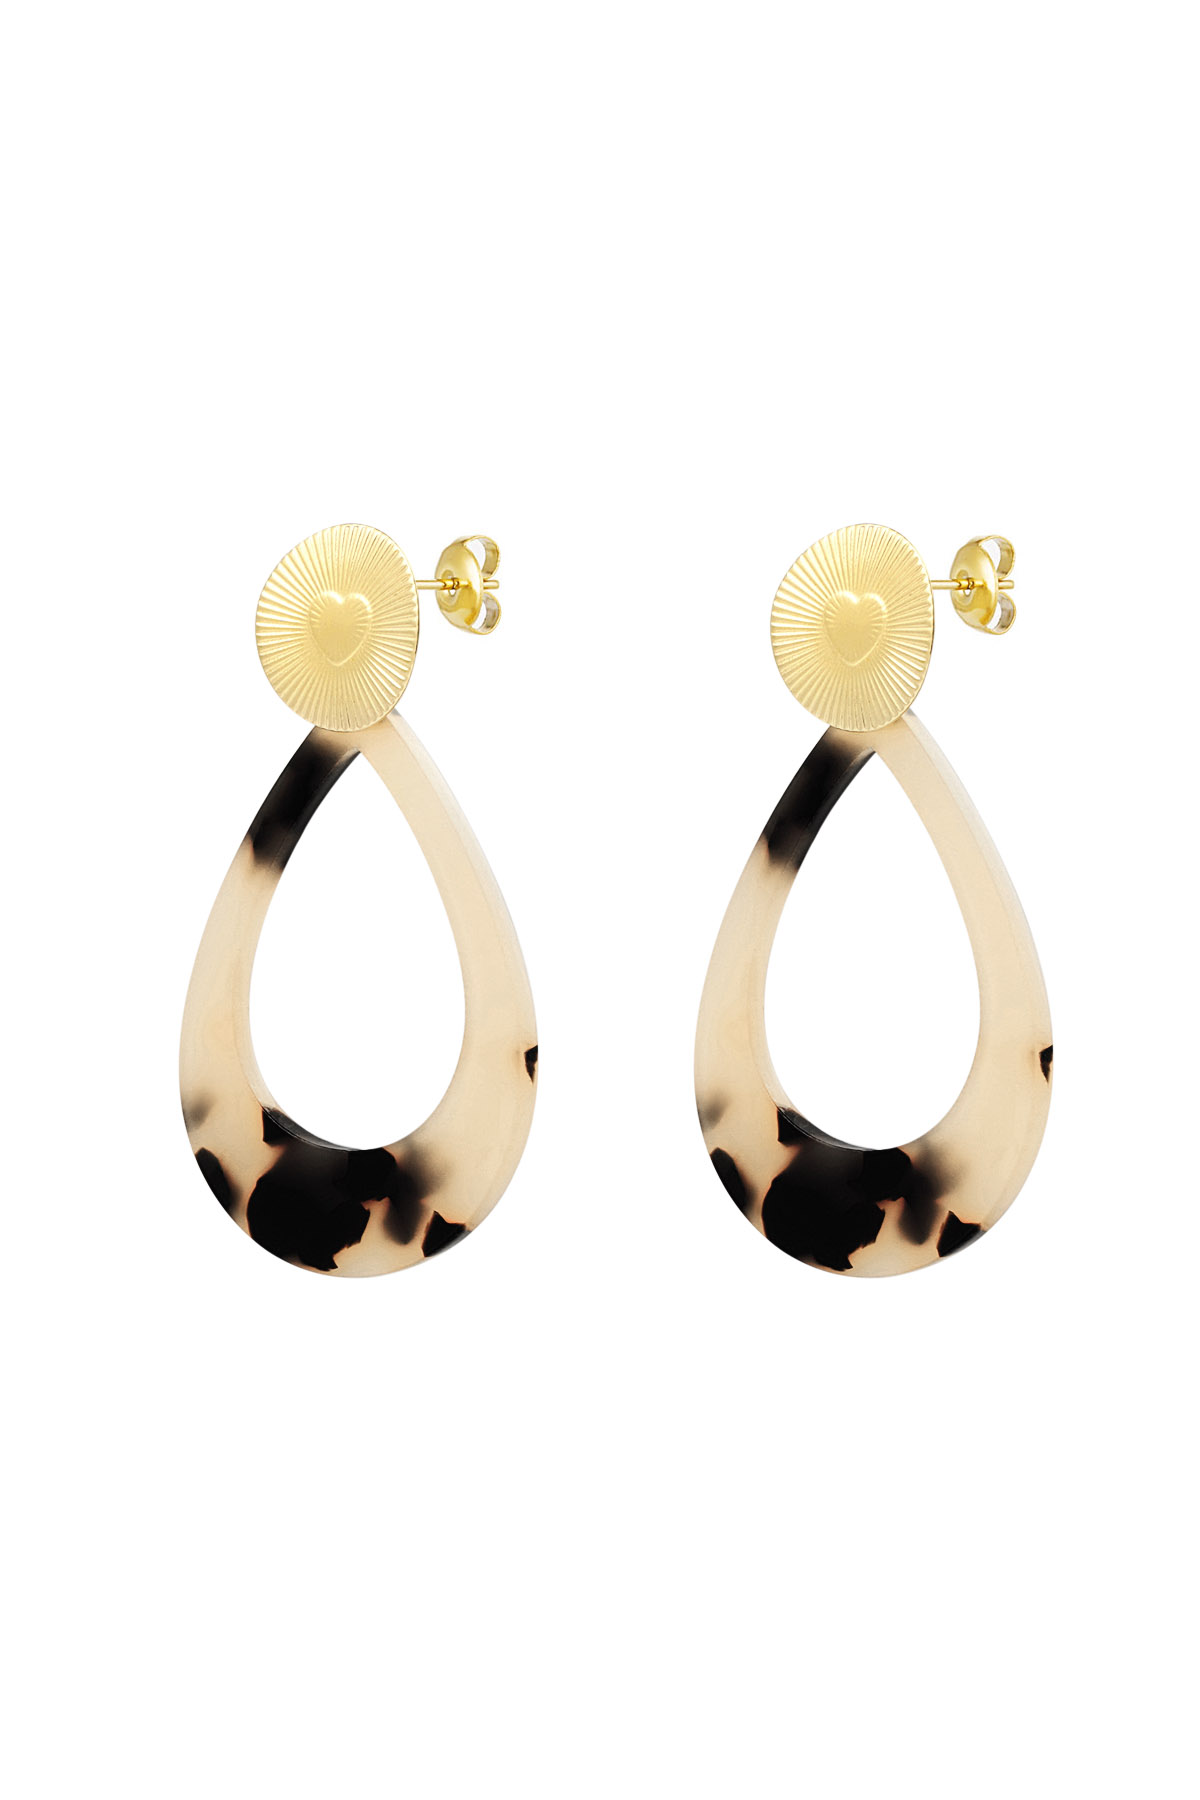 Earrings heart coin with oval - gold/beige h5 